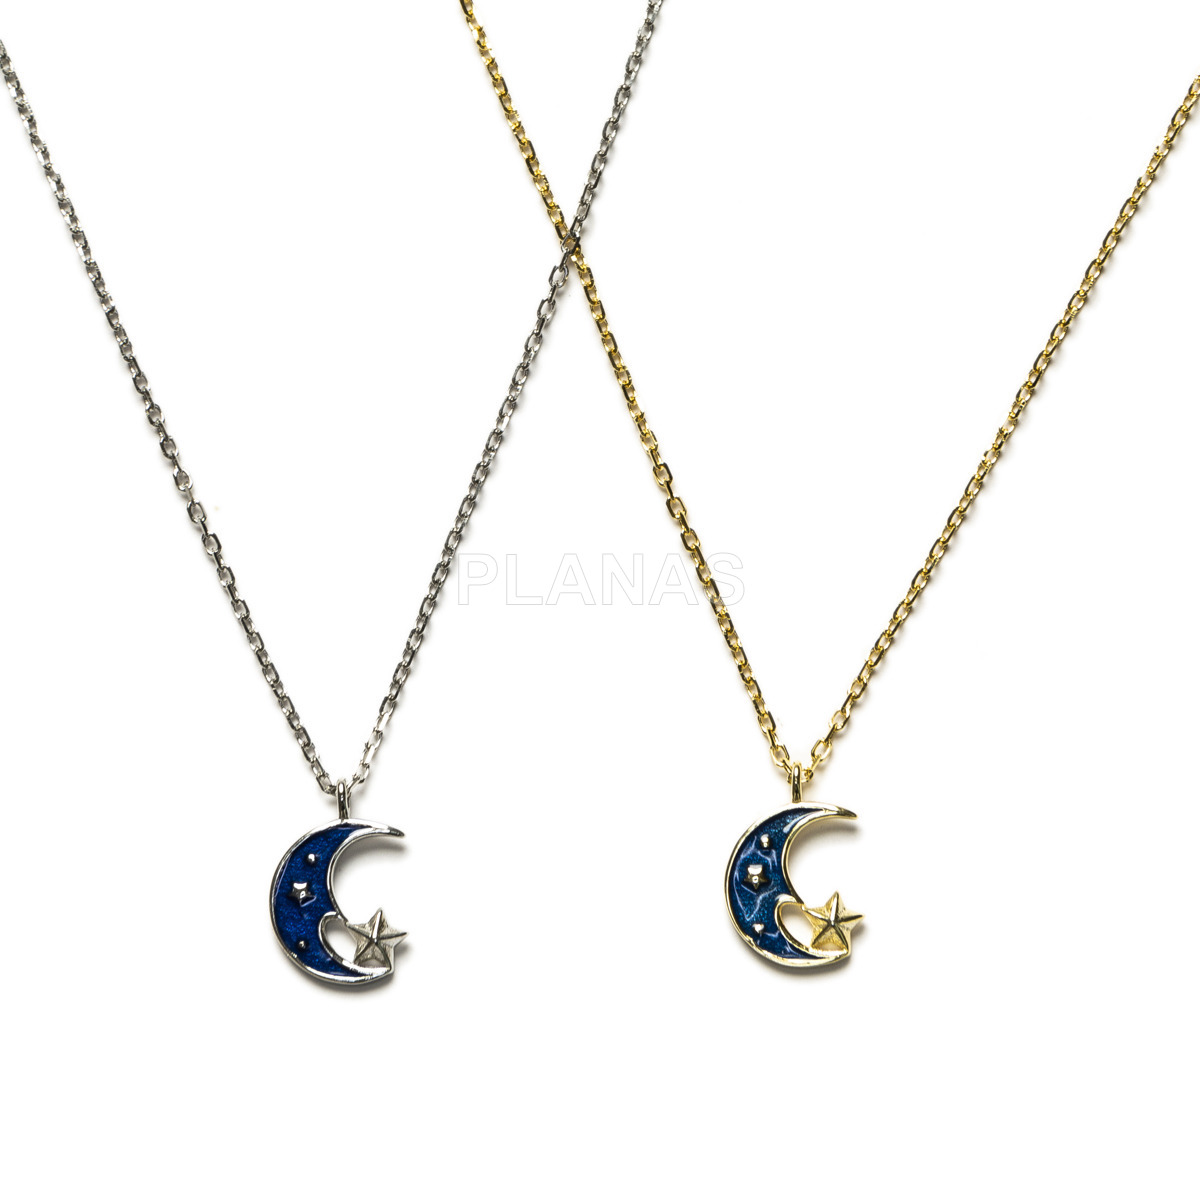 Sterling silver necklace with blue enamel. moon.